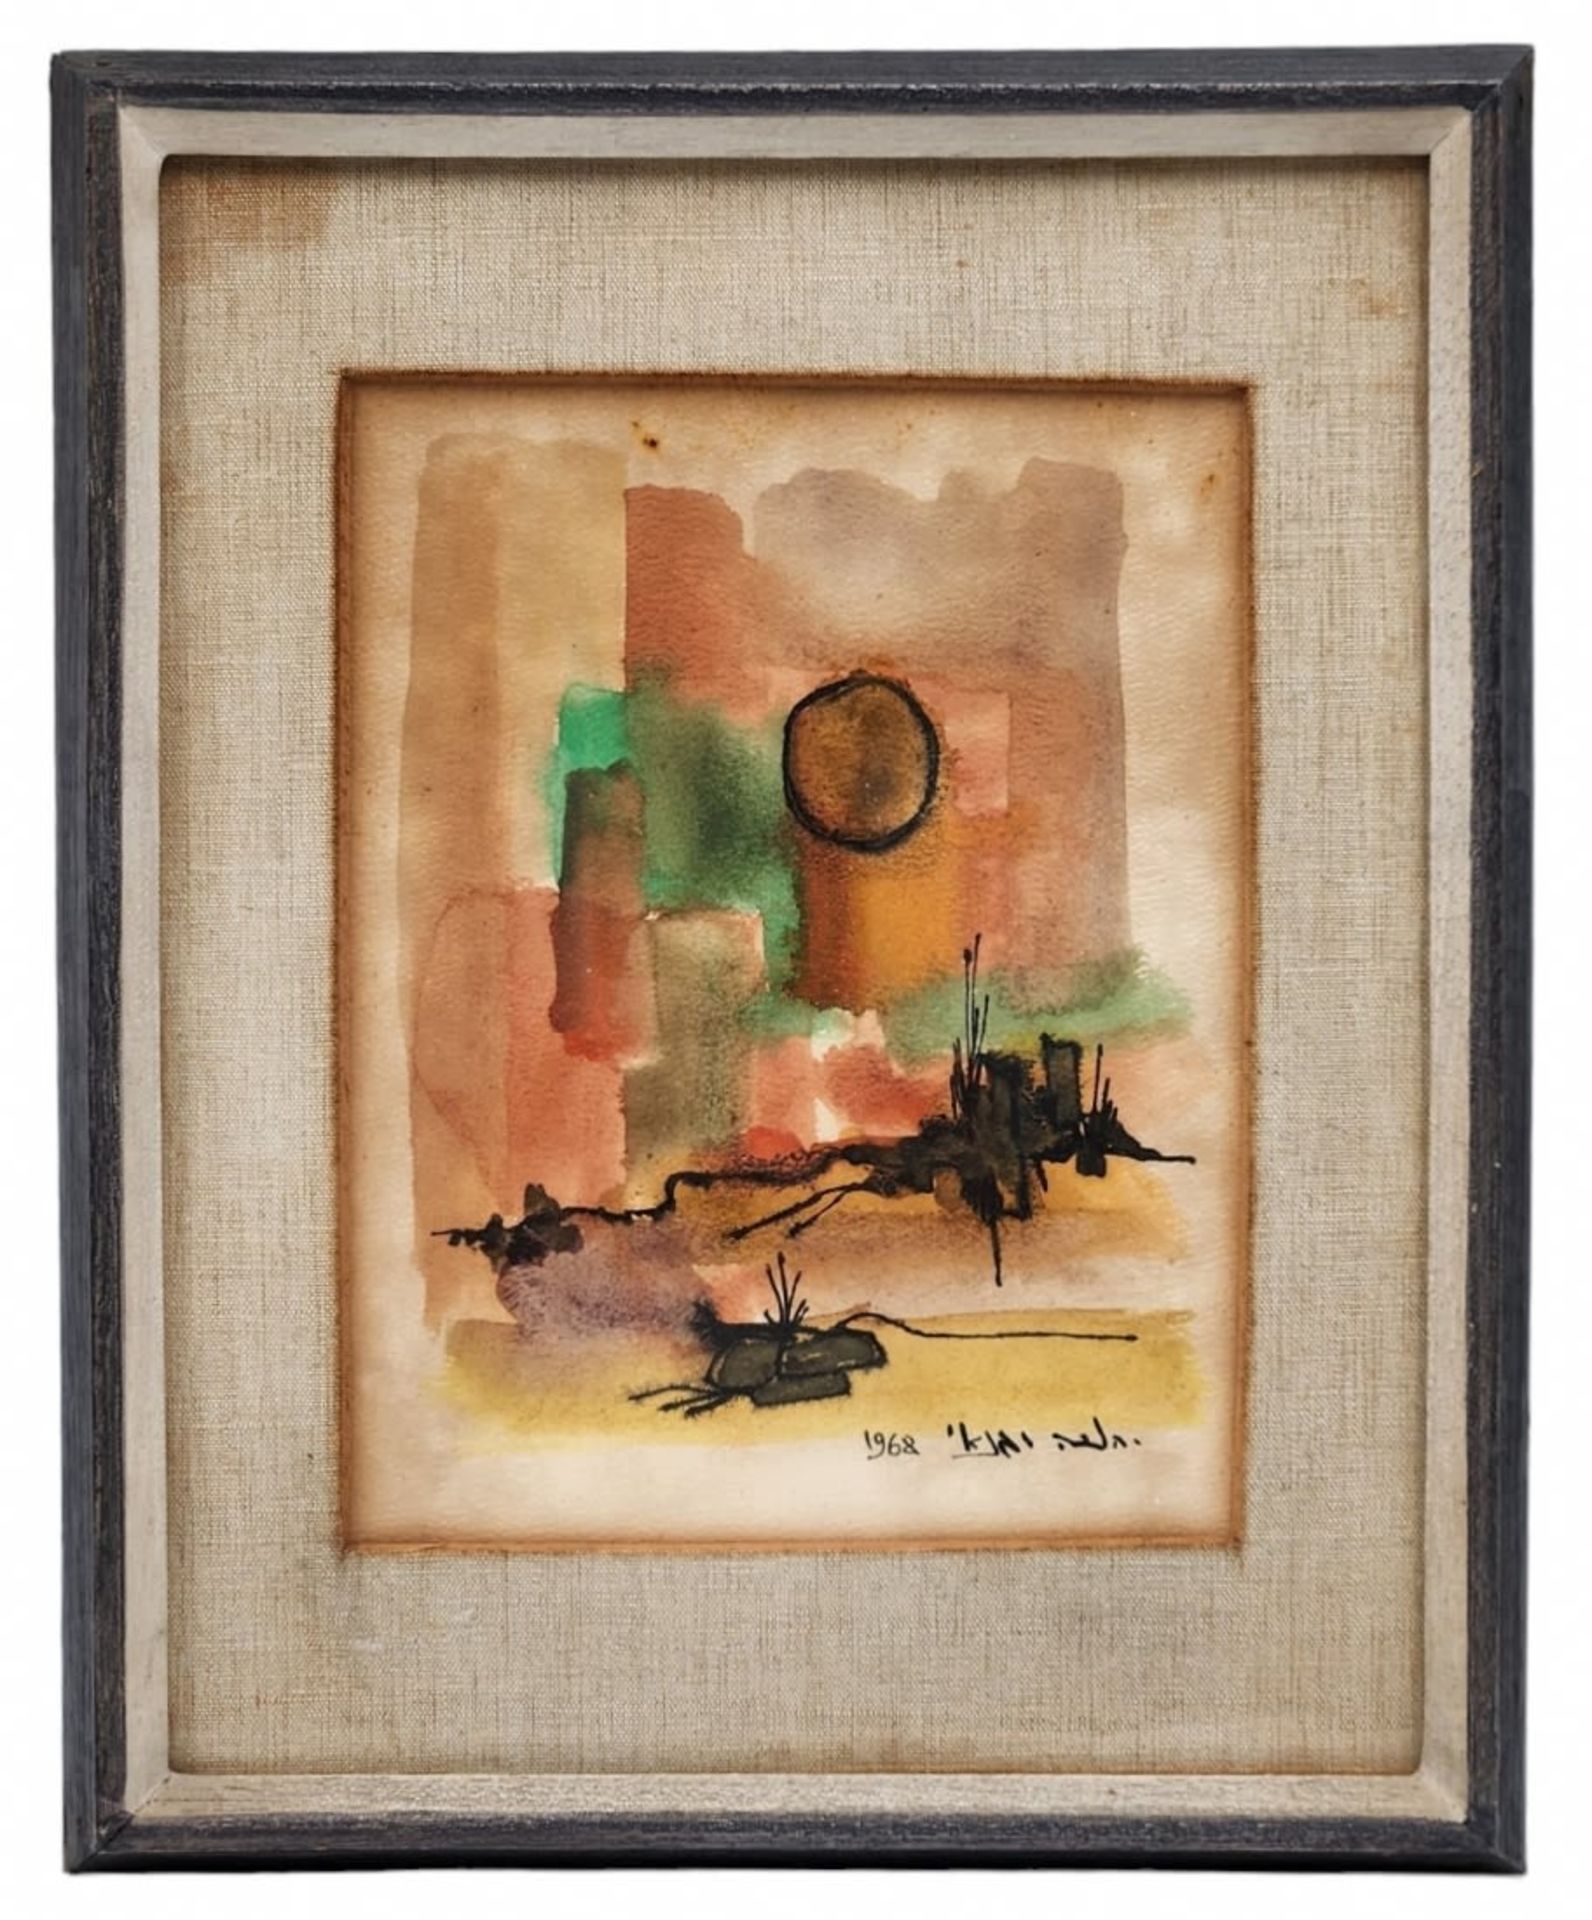 'Dusk' -' Yehuda Yavnai, watercolor on paper, signed and dated 1968, including a dedication on the - Image 2 of 4